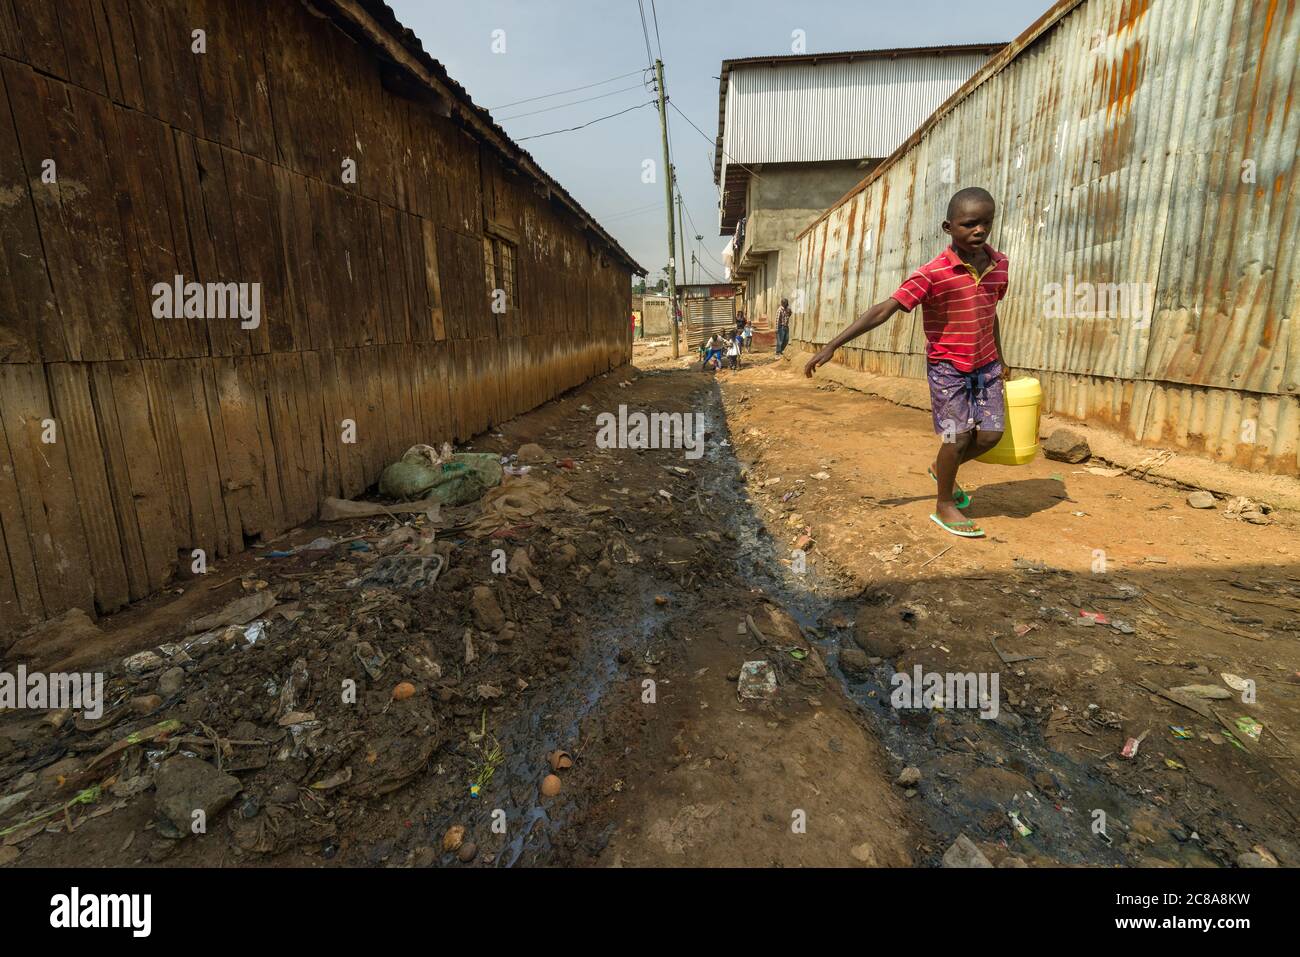 A young Kenyan boy carries a water container down a dirt alley past a building with discarded waste along it, Korogocho, Nairobi, Kenya Stock Photo